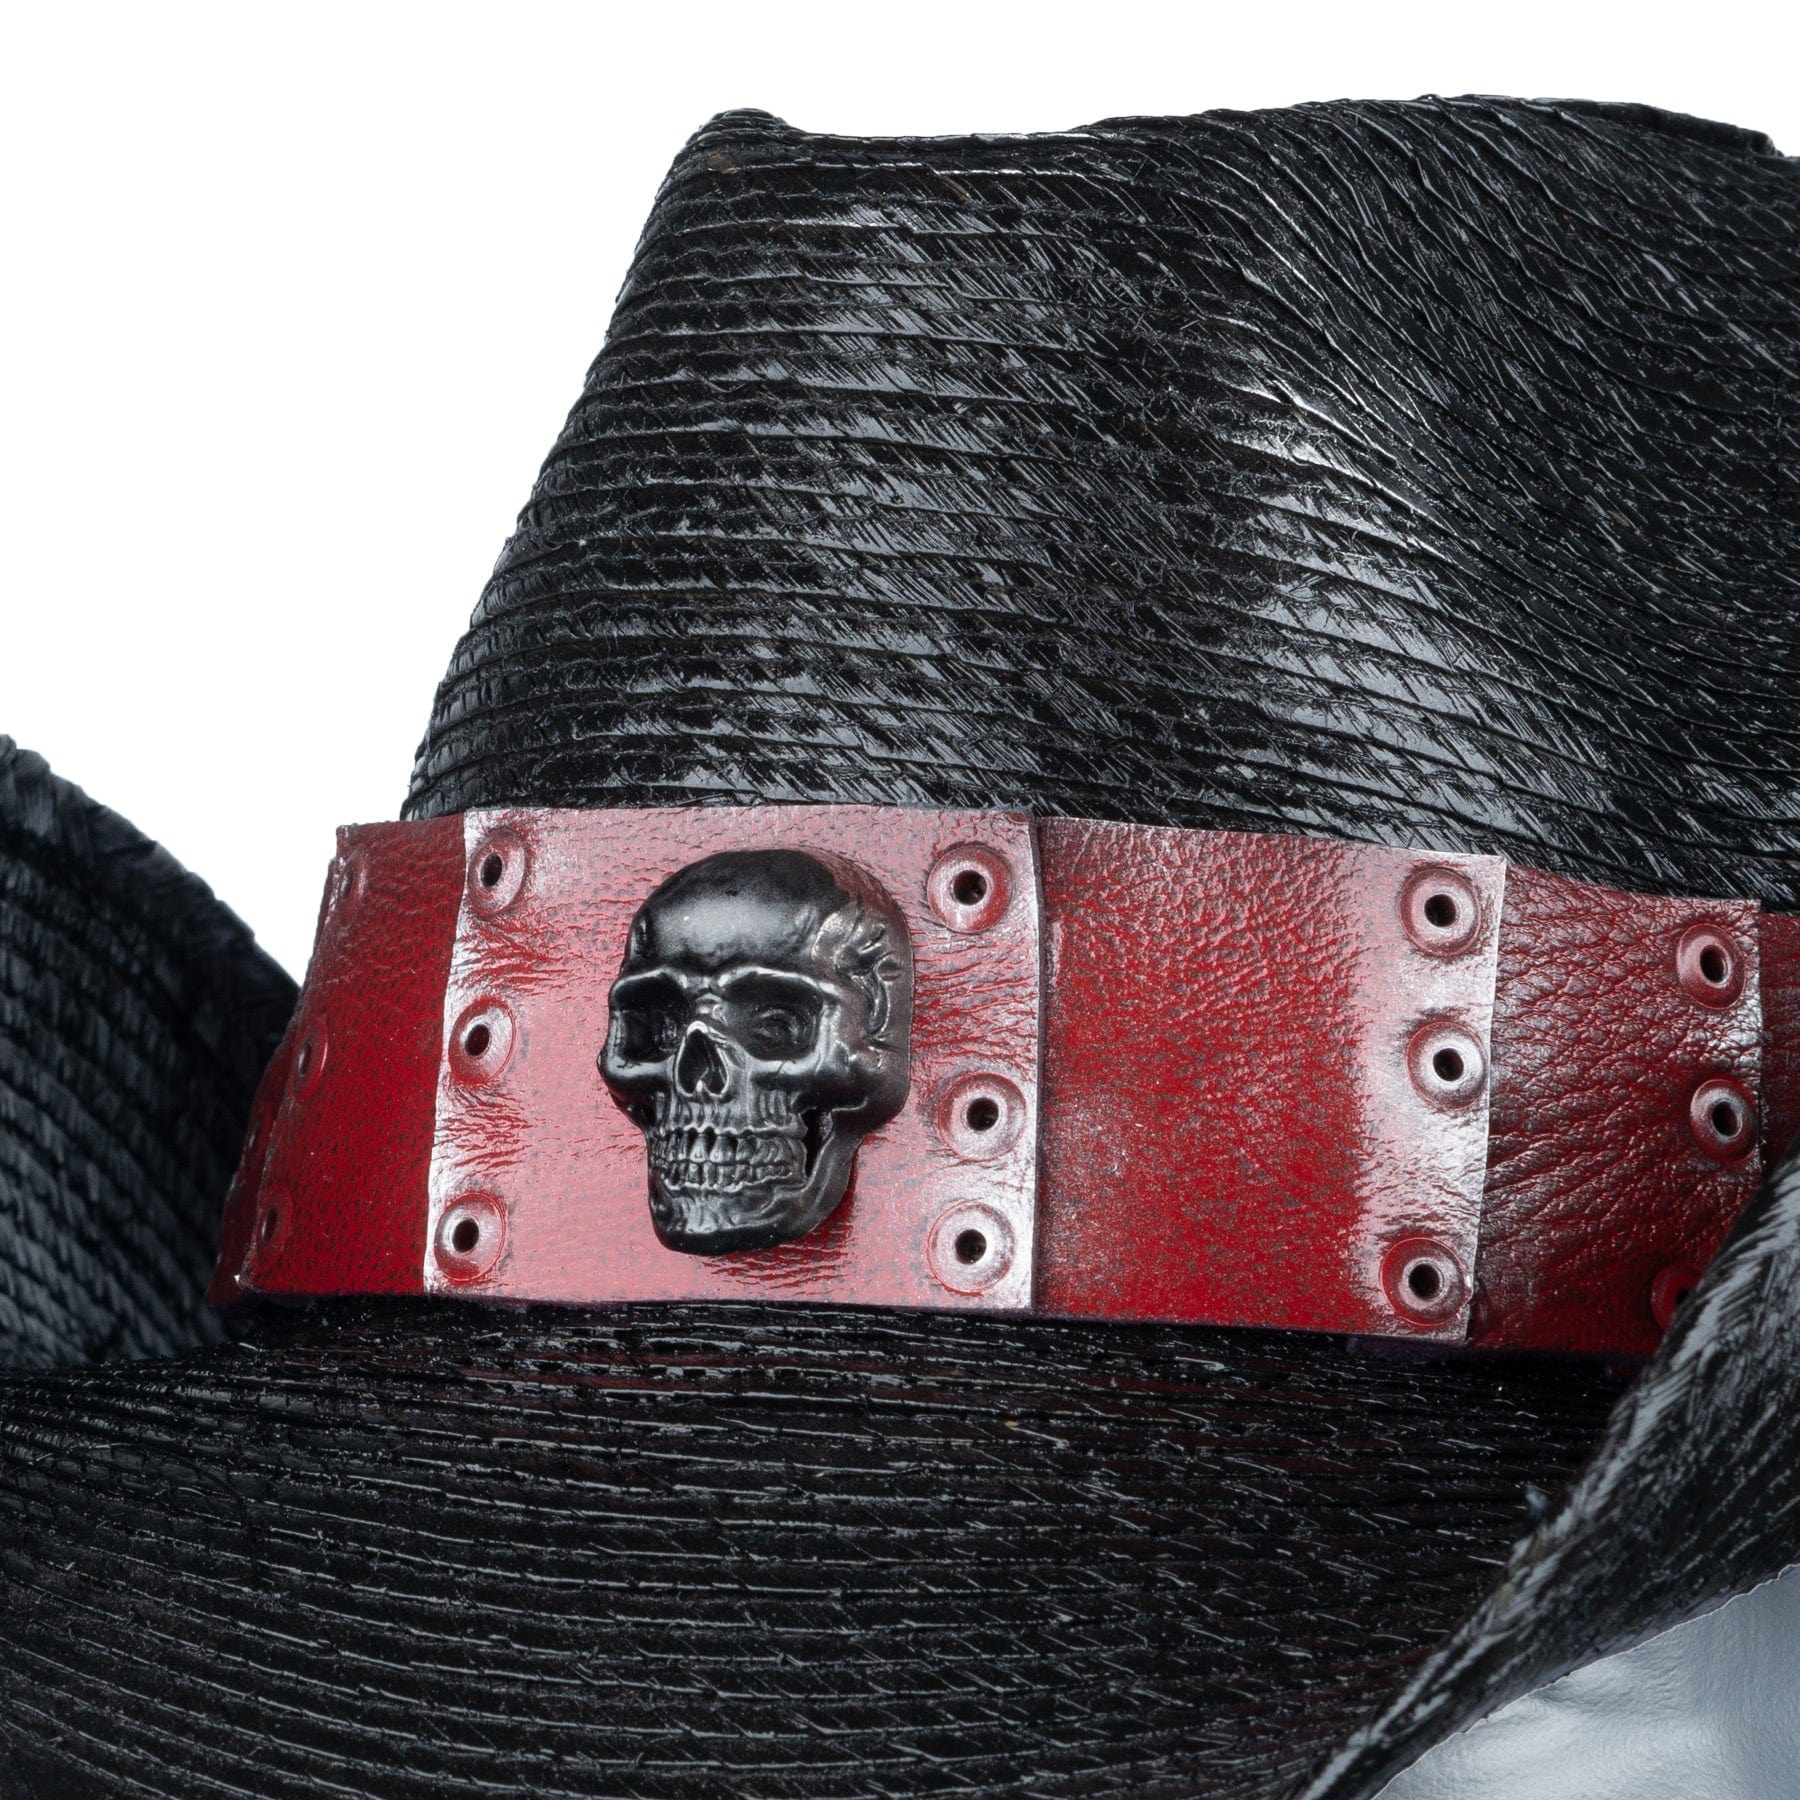 • Wornstar Custom Handmade, Stage Wear Collection• Handmade, leather hatband (hatband only)• Hand-painted• Adjustable size. Ties in the back.• Designed, made, and sold exclusively by Wornstar Clothing• Handmade at the time of order• Made with upcycled leather• Hand-set studs and skull• 